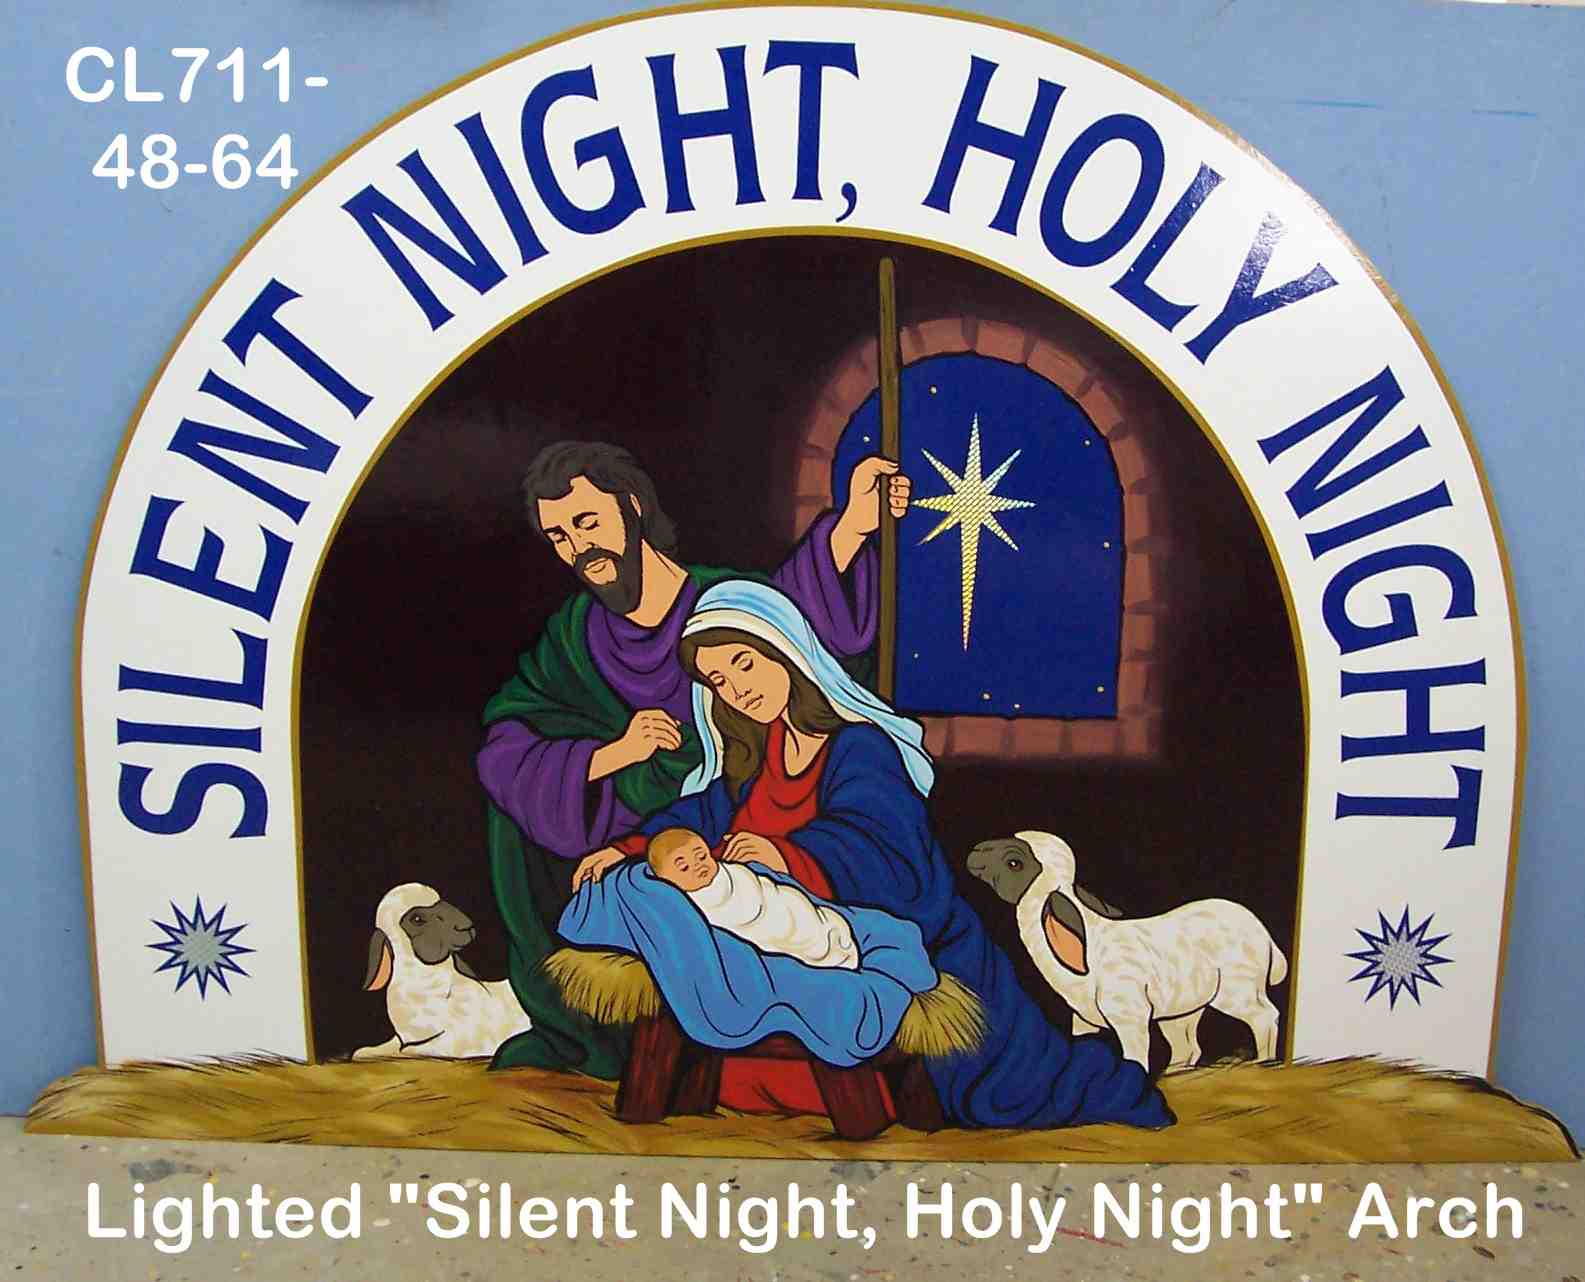 CL711"Silent Night, Holy Night" Arch